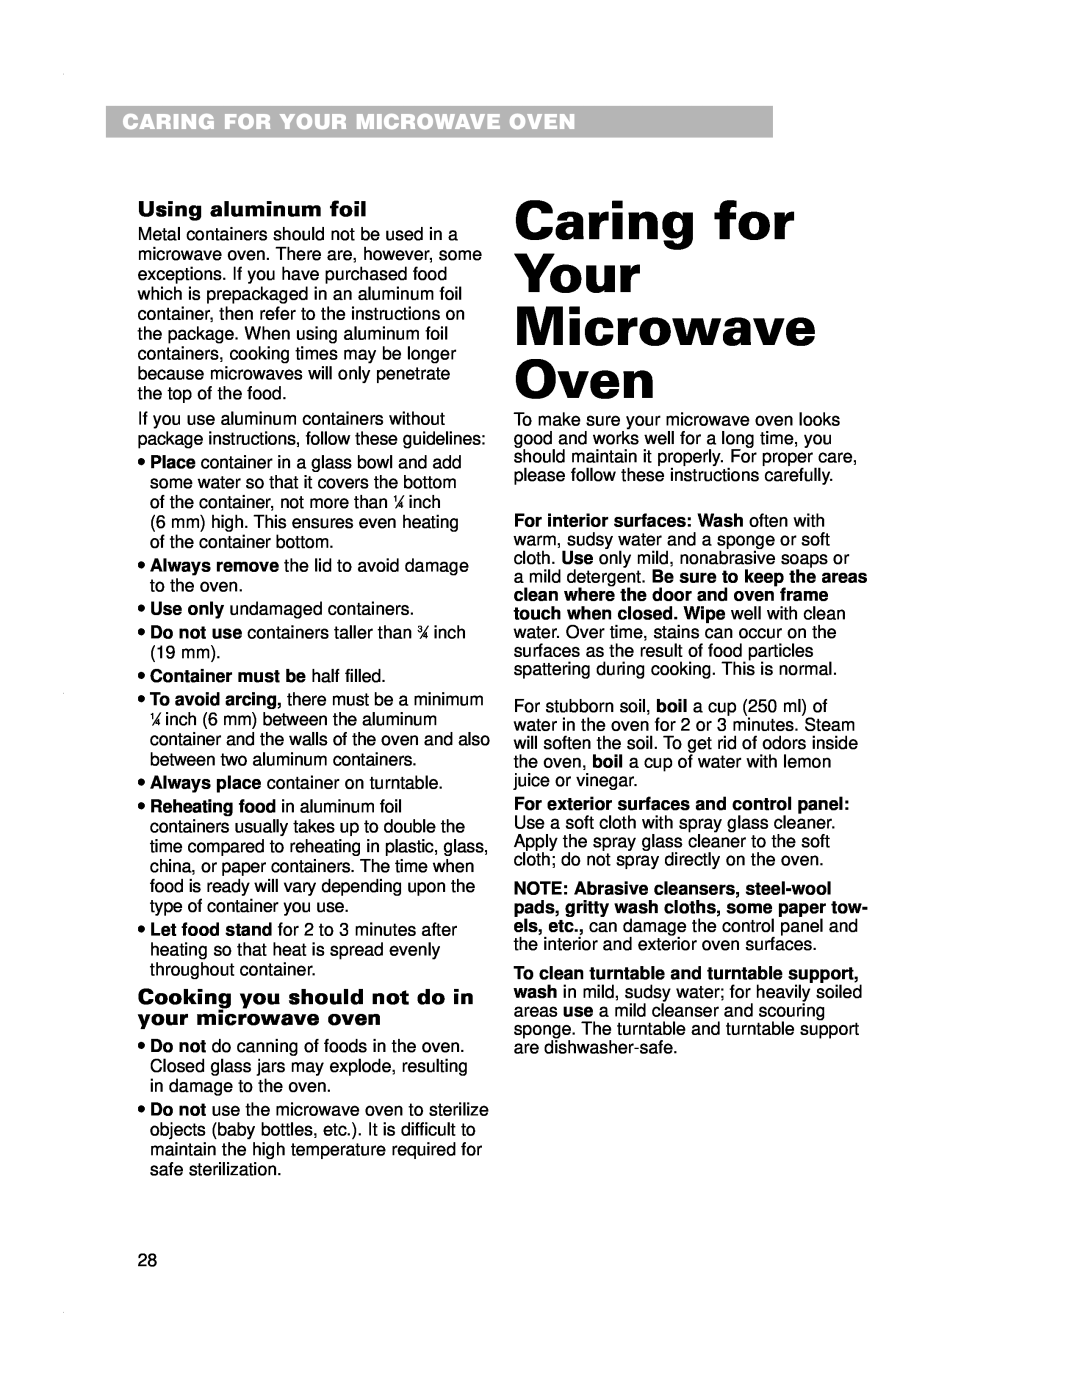 Crosley CMT135SG Caring for Your Microwave Oven, Caring For Your Microwave Oven, Using aluminum foil 